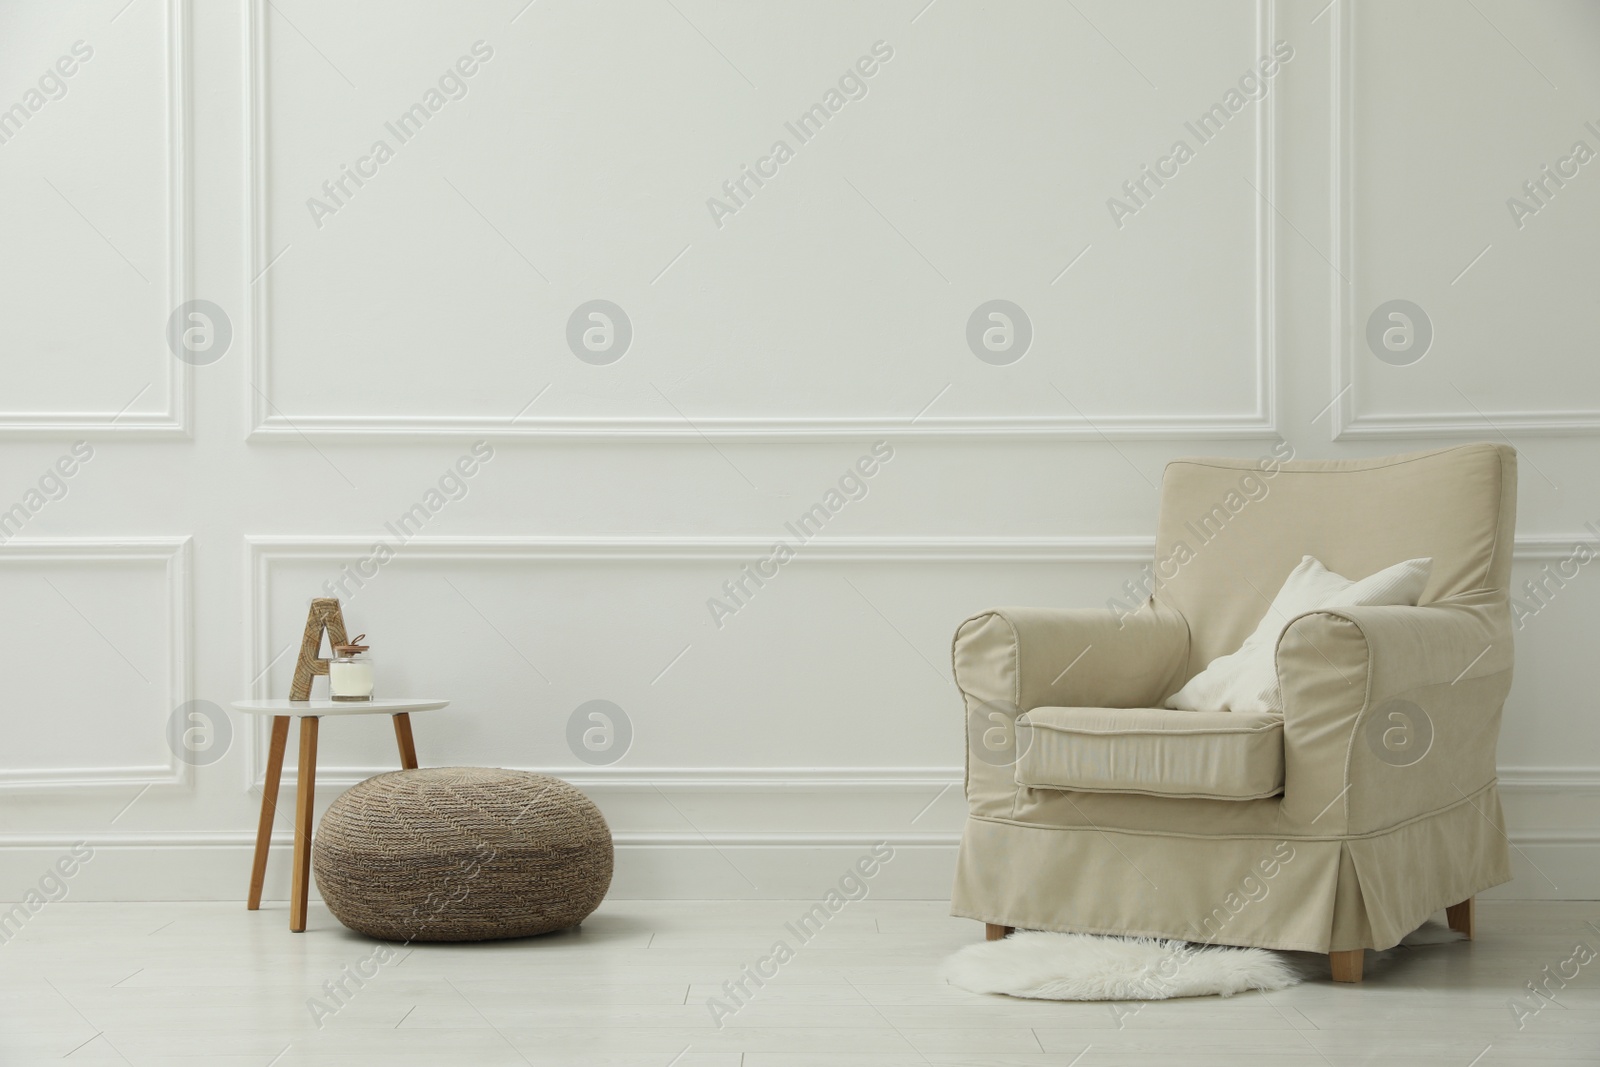 Photo of Stylish room interior with pouf, armchair and decor elements. Space for text